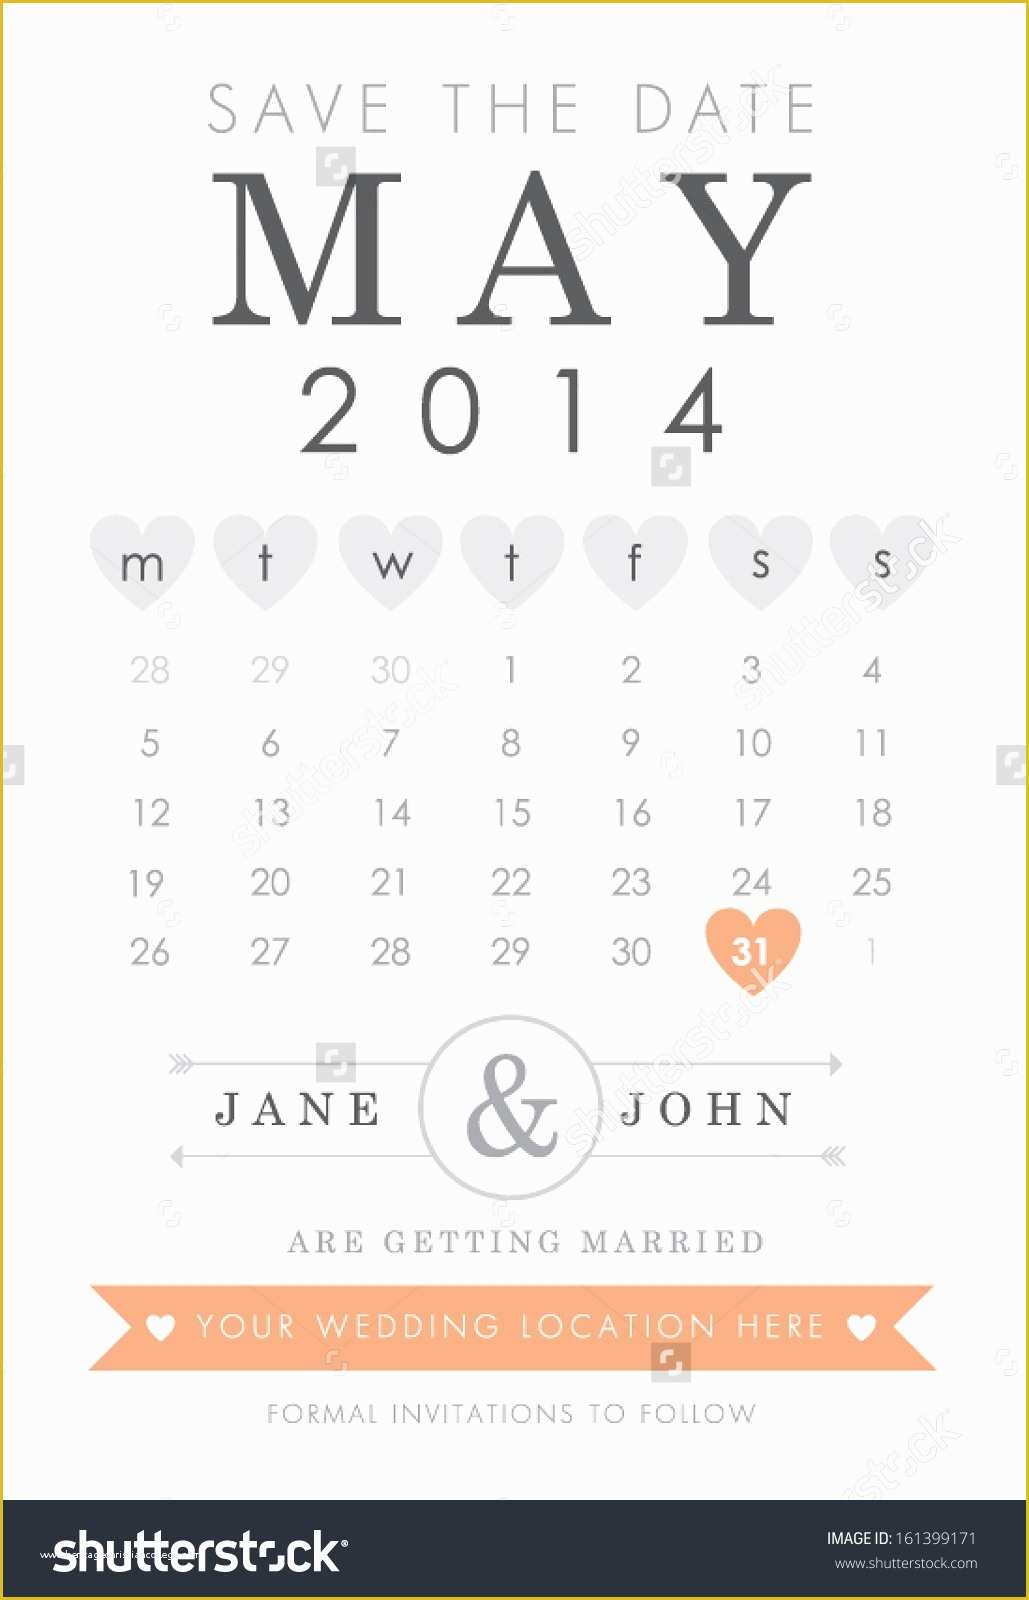 Microsoft Save the Date Templates Free Of Calendar Save the Date Template